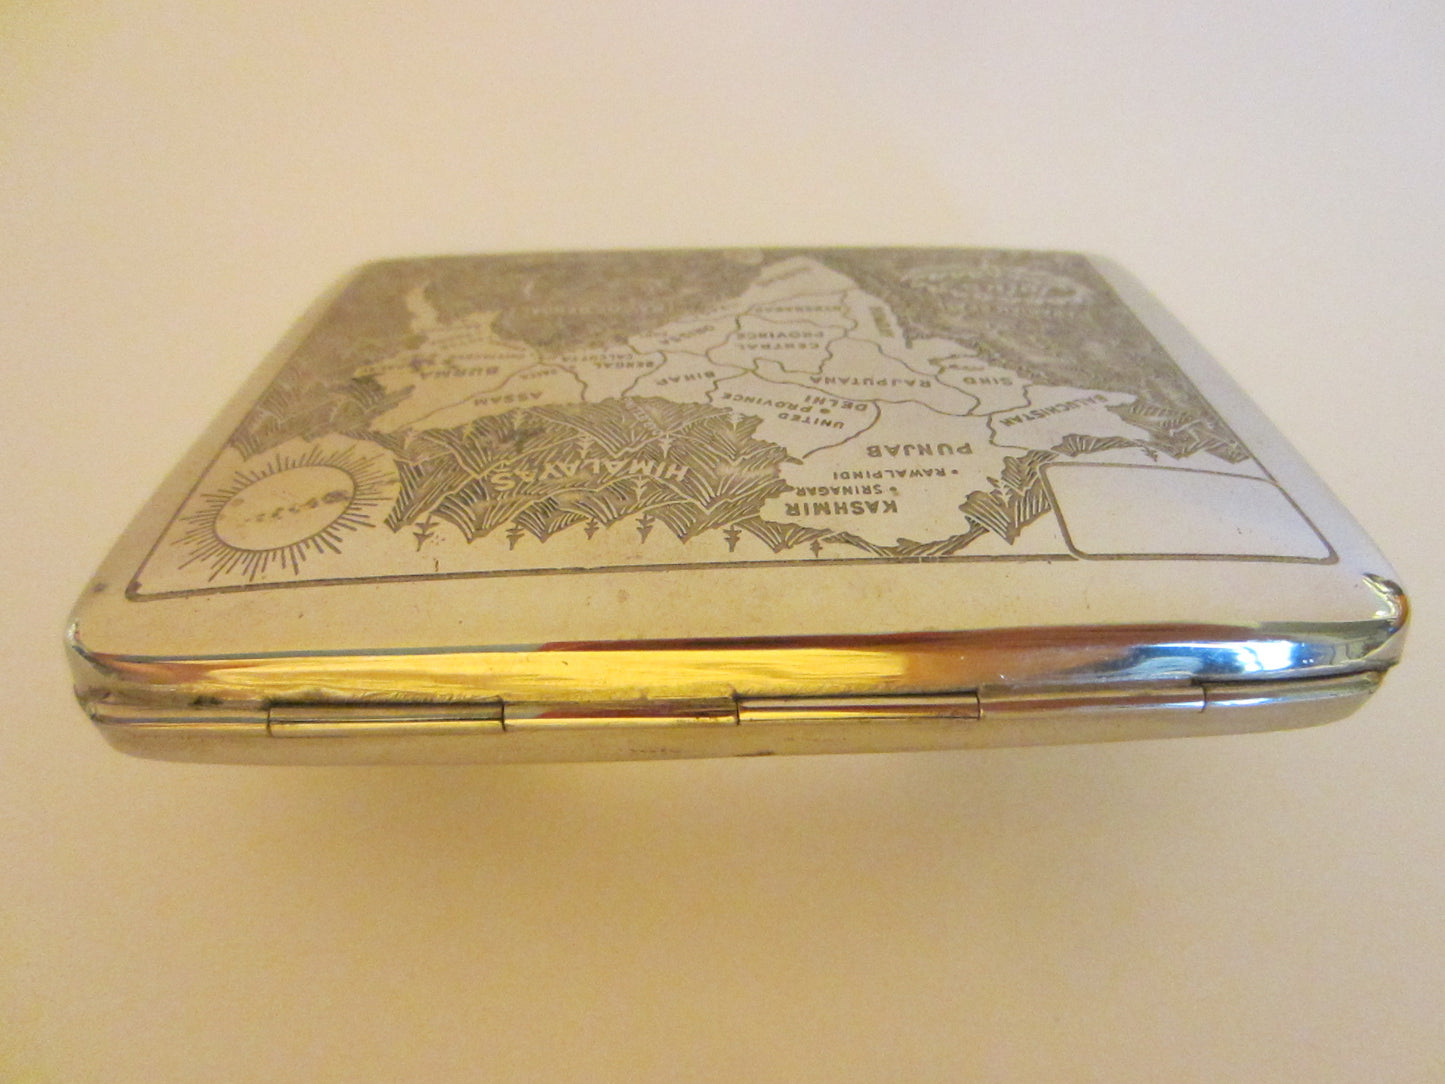 Lotus South Asia Map Decorated Chasing Engraving Silver Case - Designer Unique Finds 